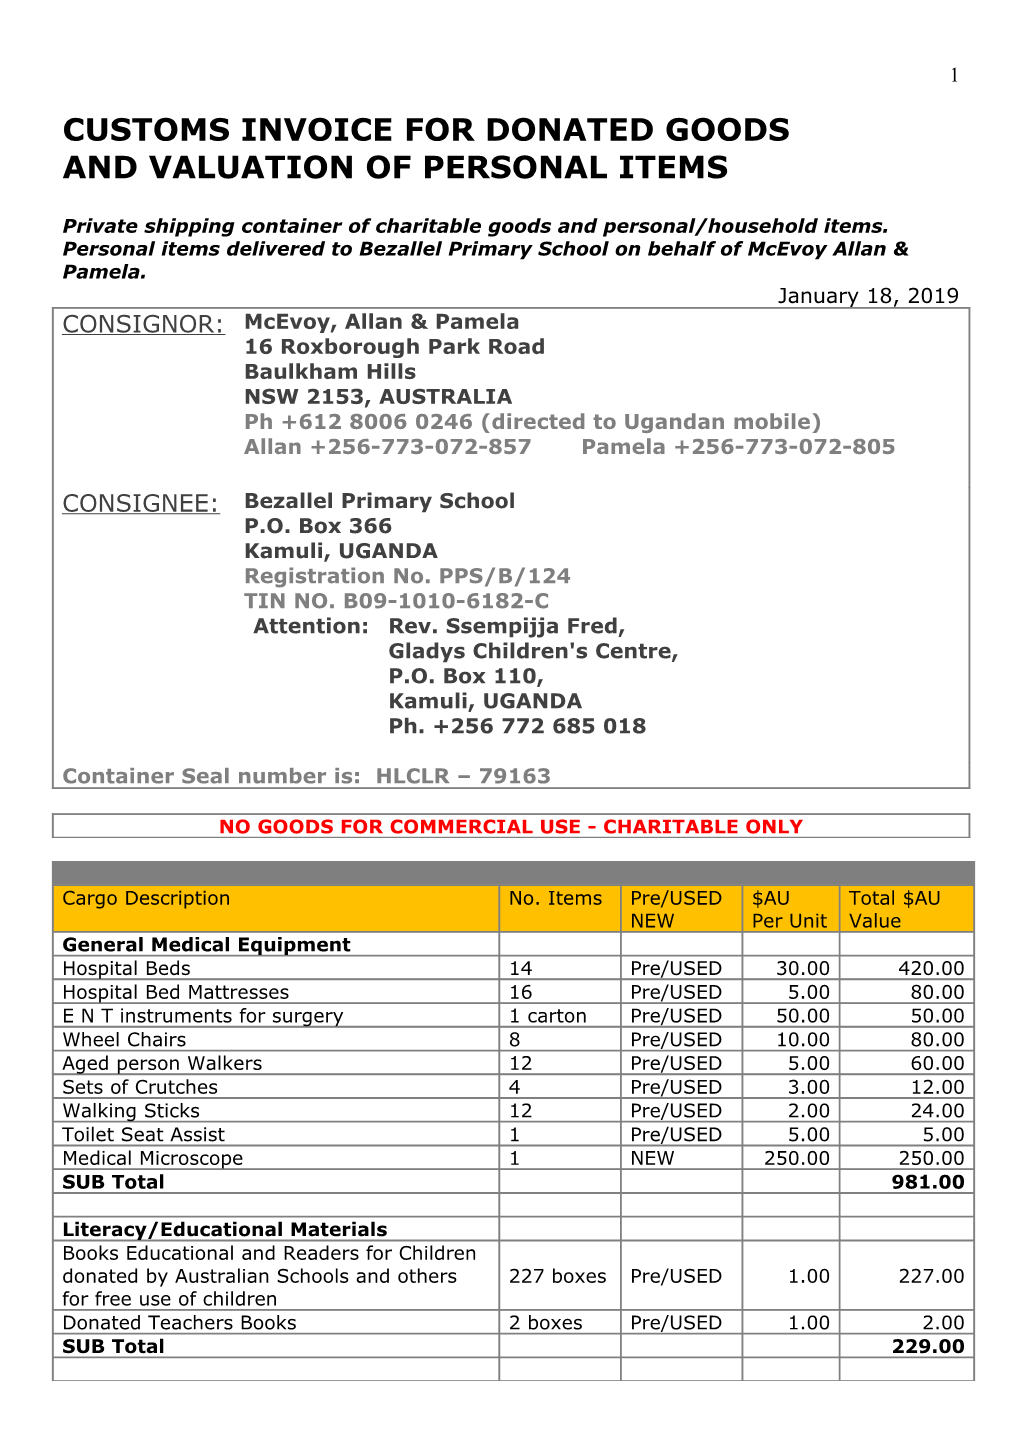 Customs Invoice for Donated Goods